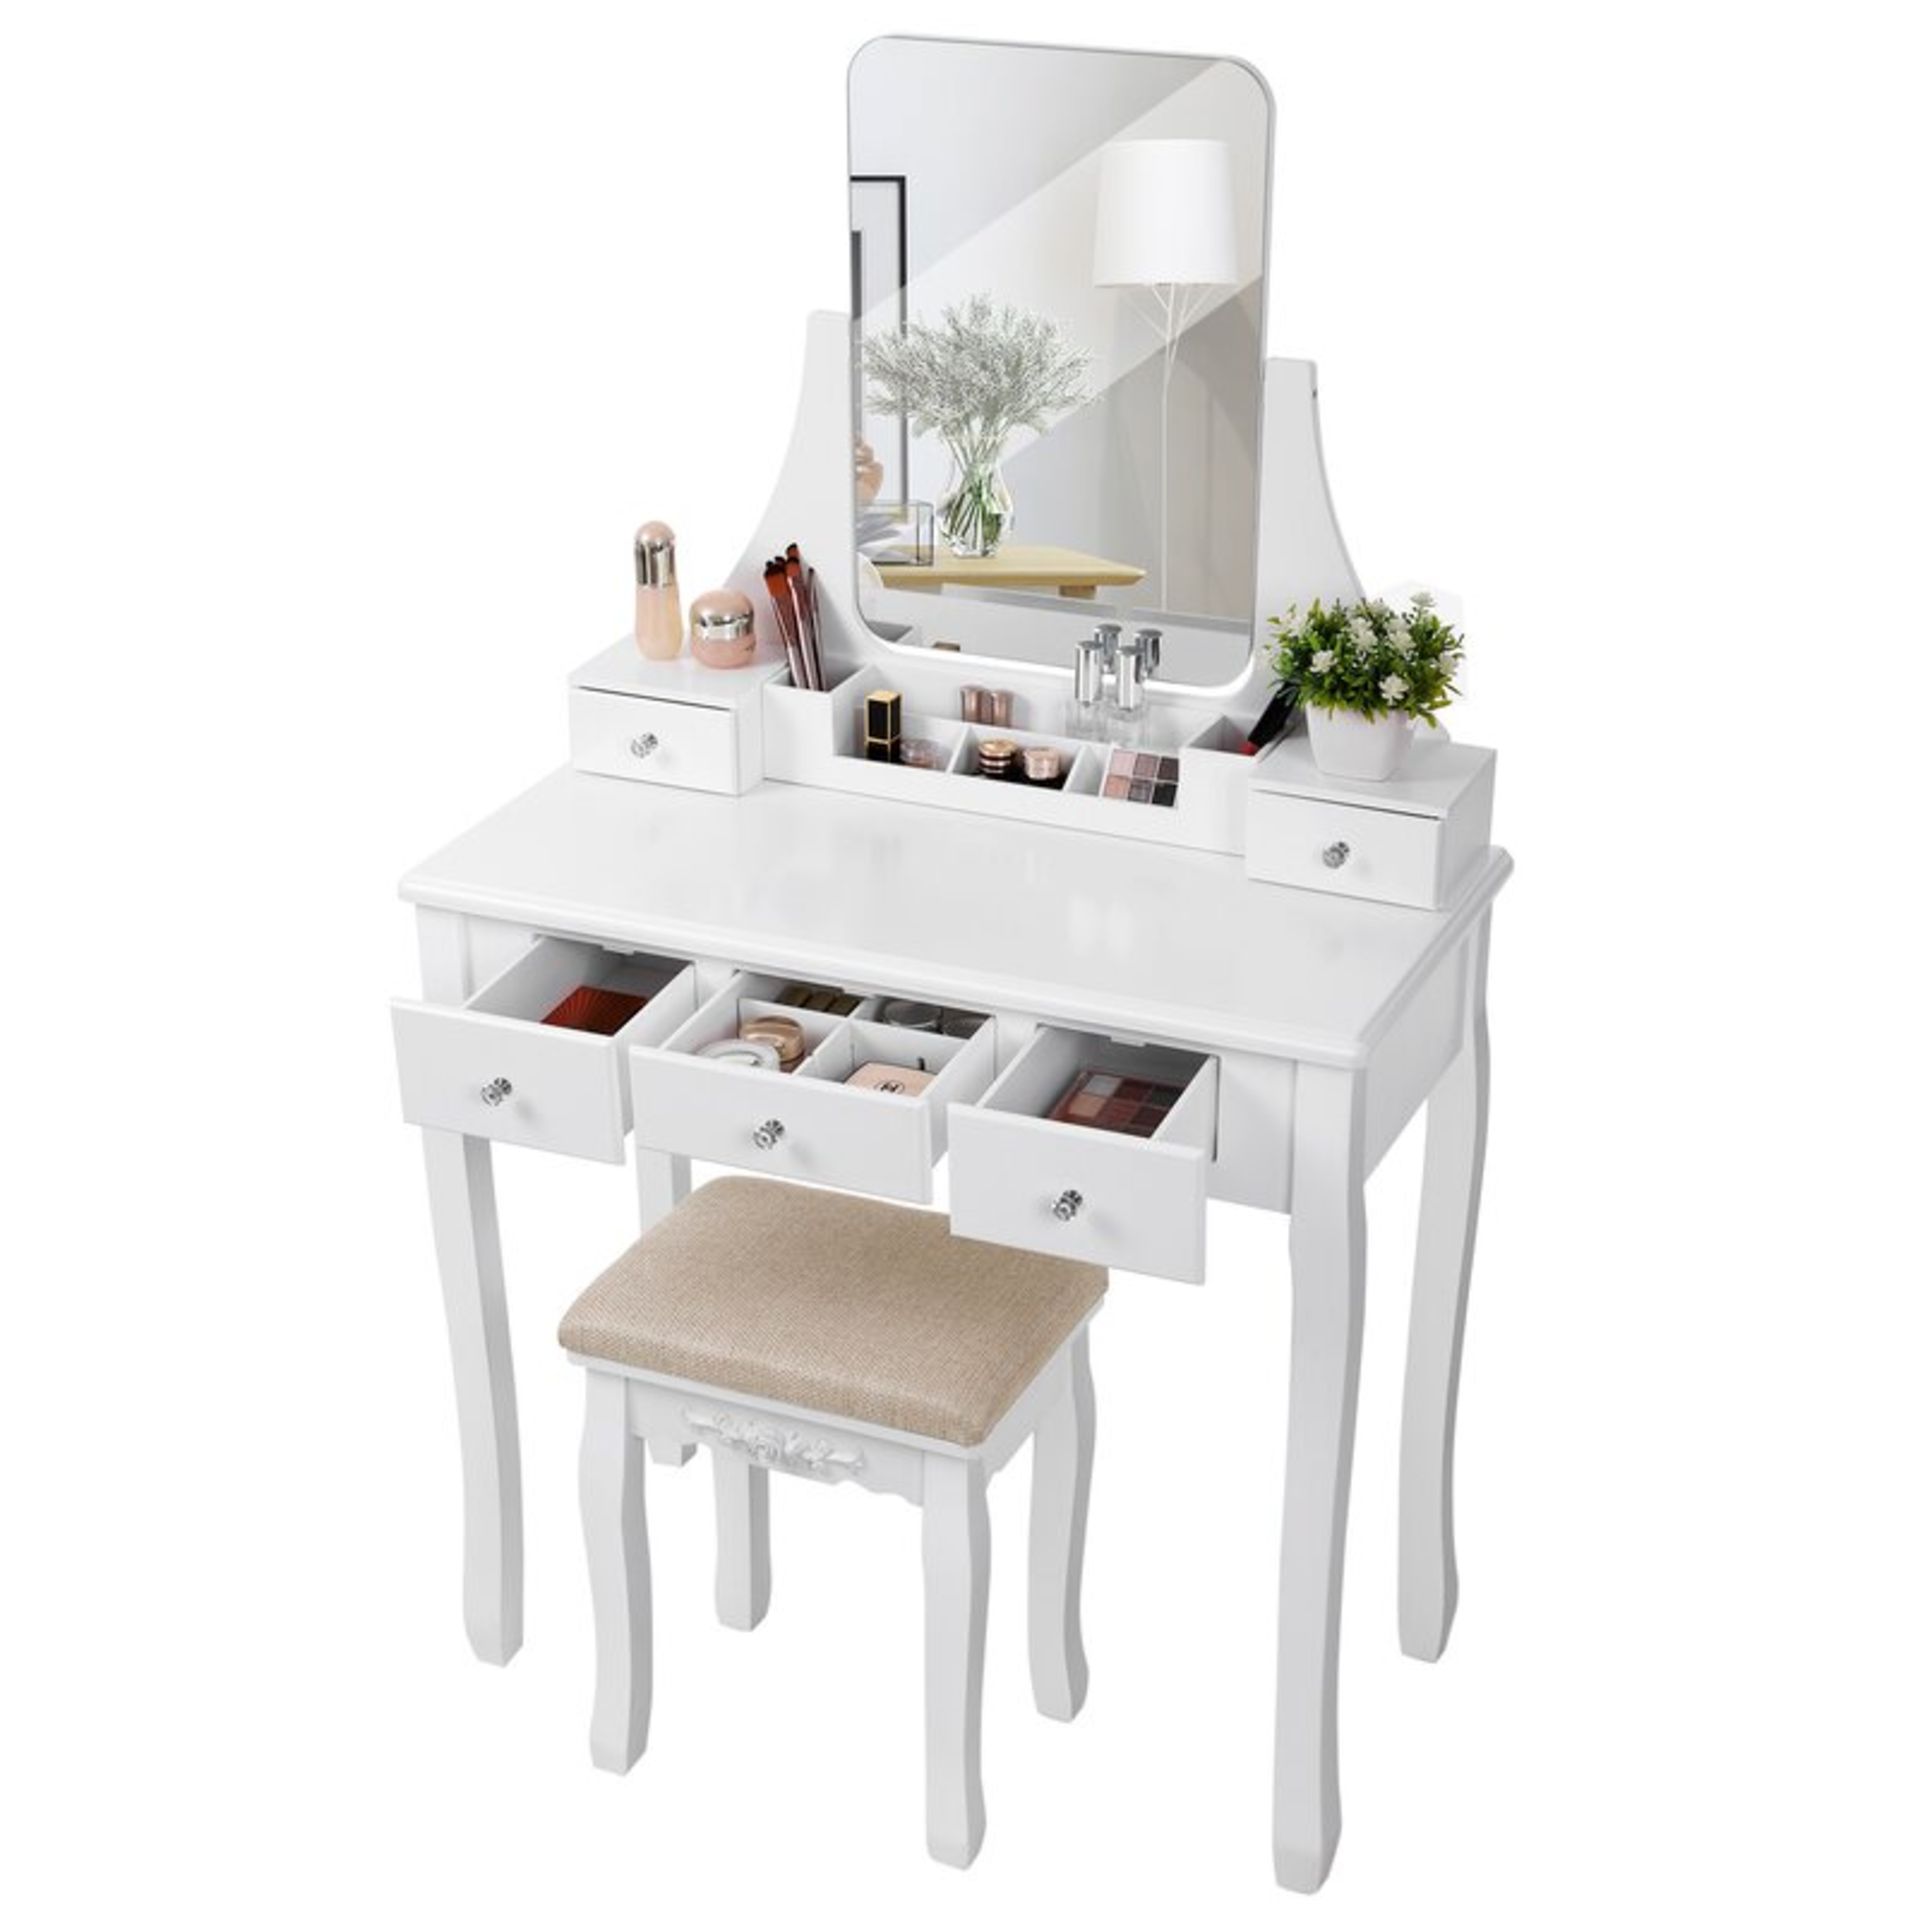 Arkin Dressing Table Set with Mirror - RRP £145.99 - Image 2 of 2